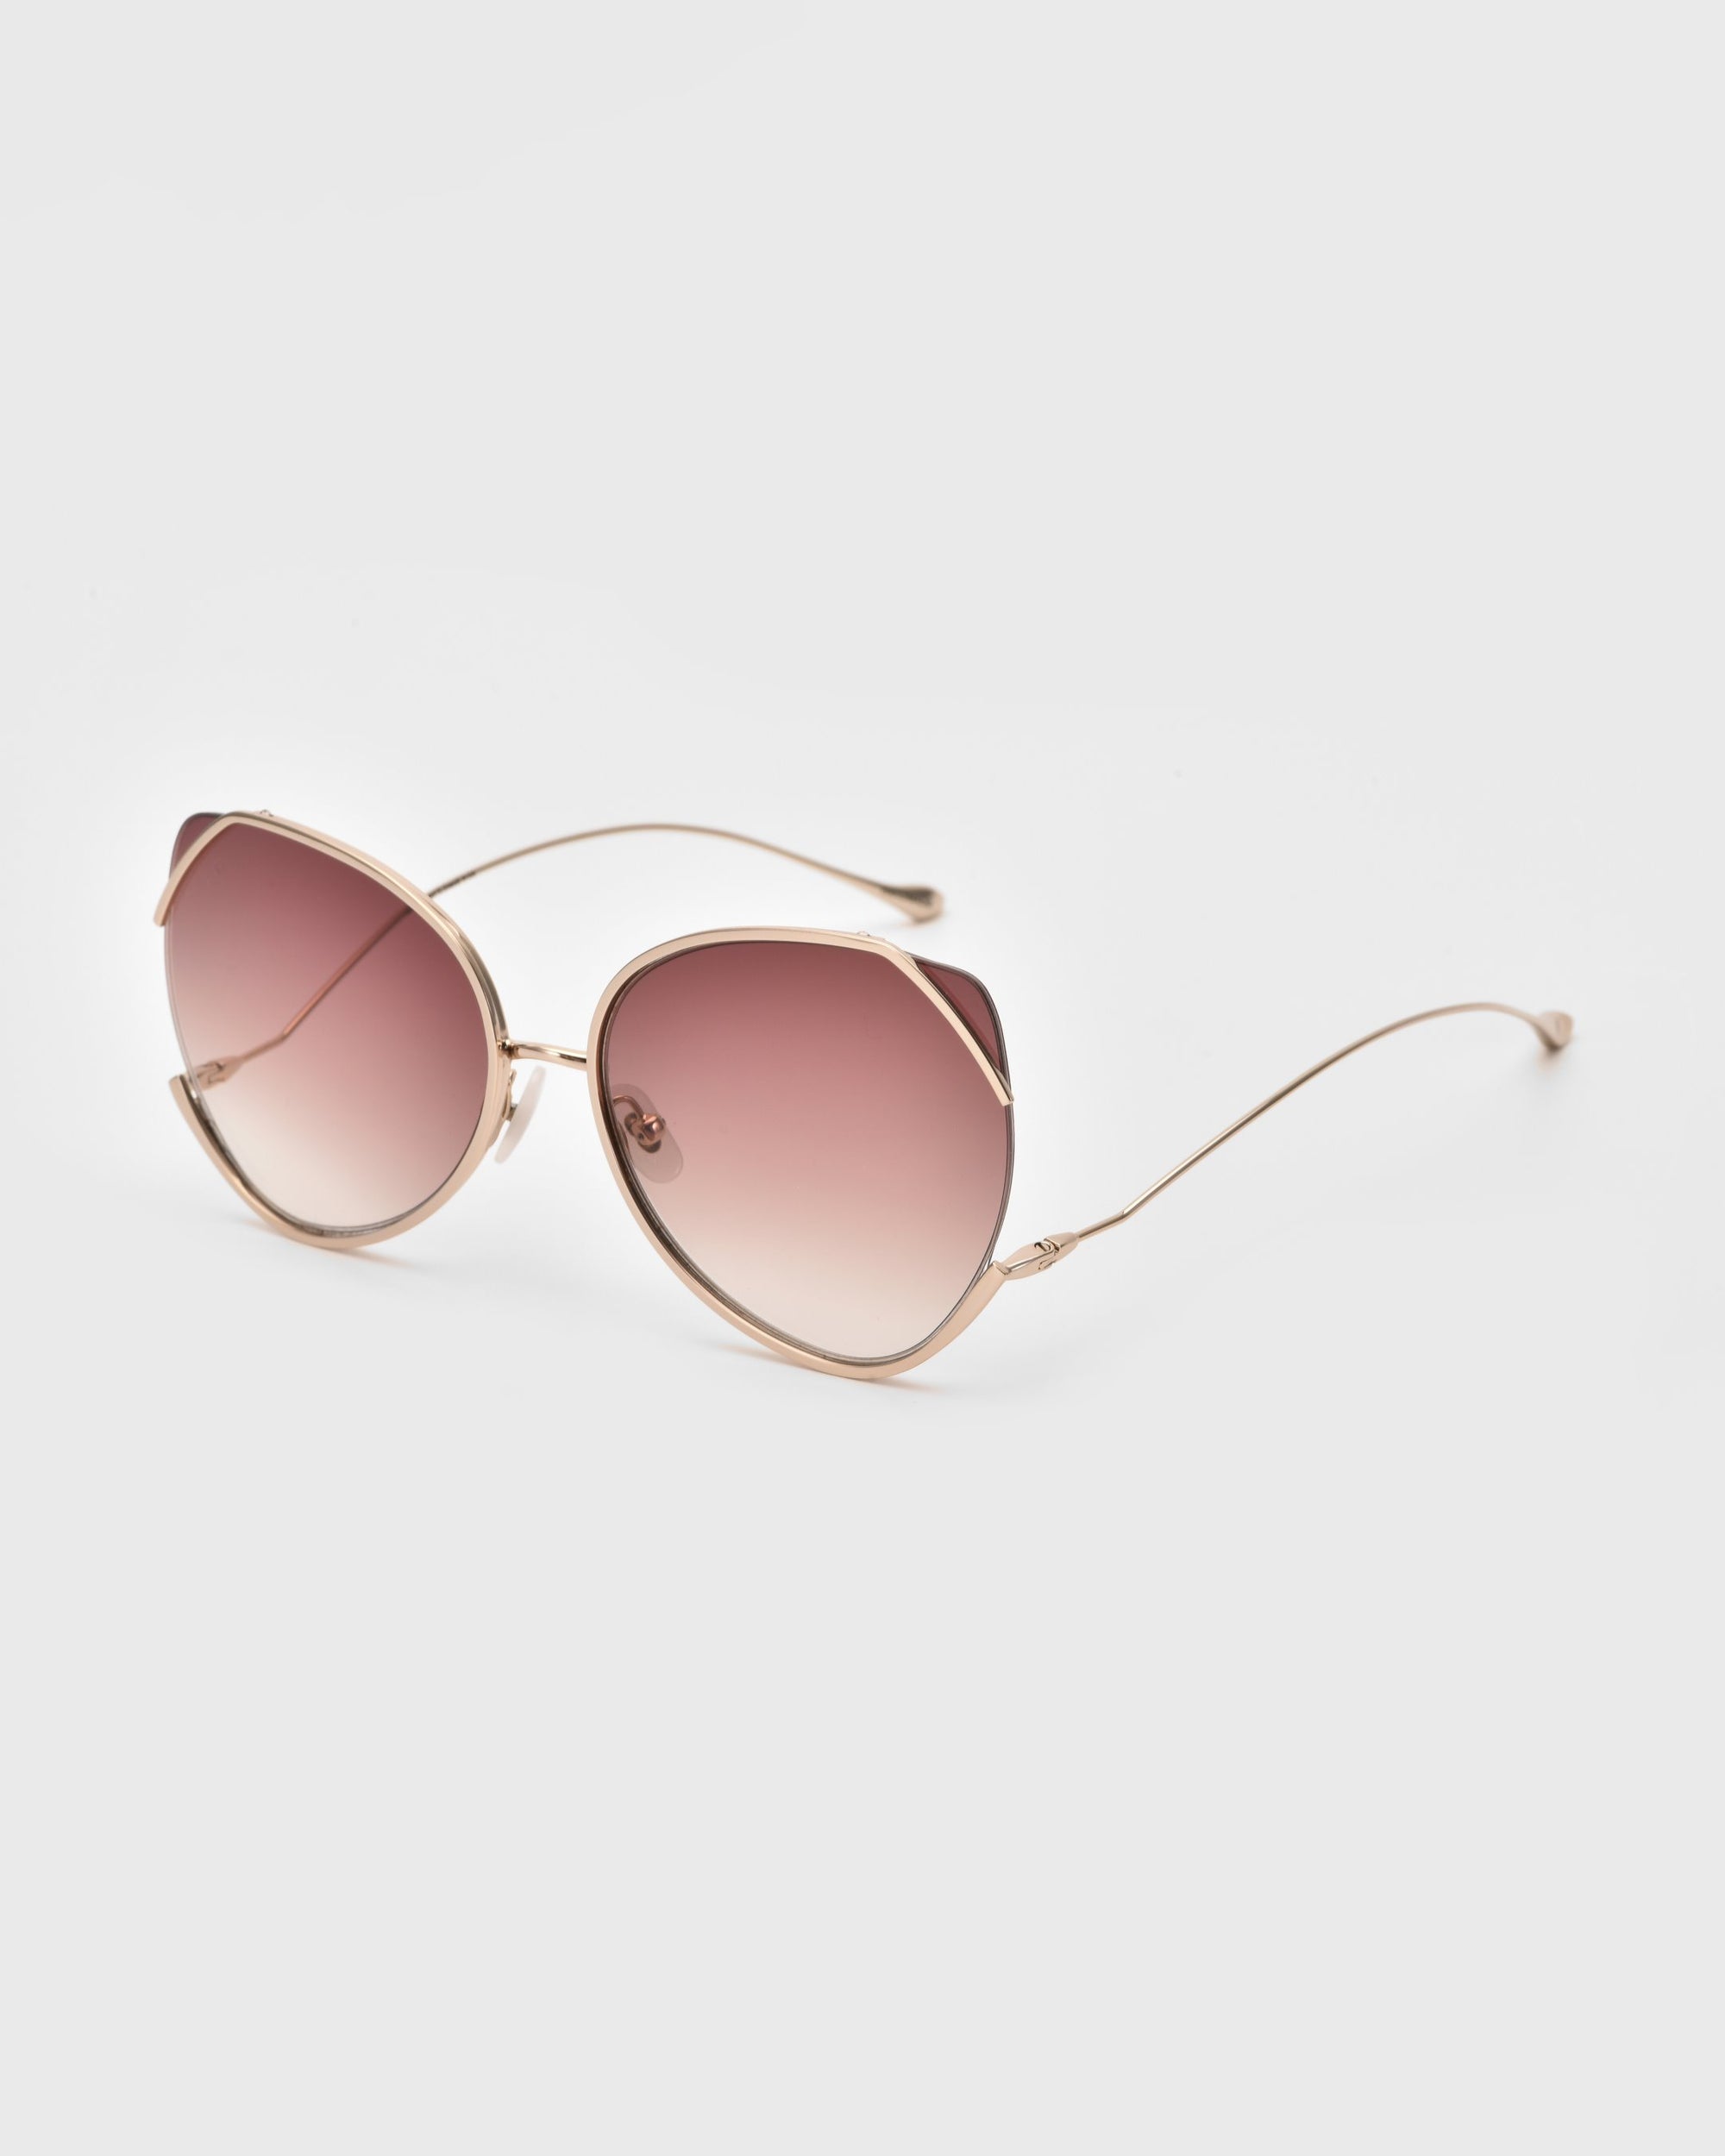 A pair of stylish For Art&#39;s Sake® Wonderland sunglasses with gold metal frames, highlighted by large, rounded lenses featuring a gradient tint from dark pink to light pink. Perfectly crafted with UV protection and adorned with jadestone nose pads, they rest elegantly on a white background.